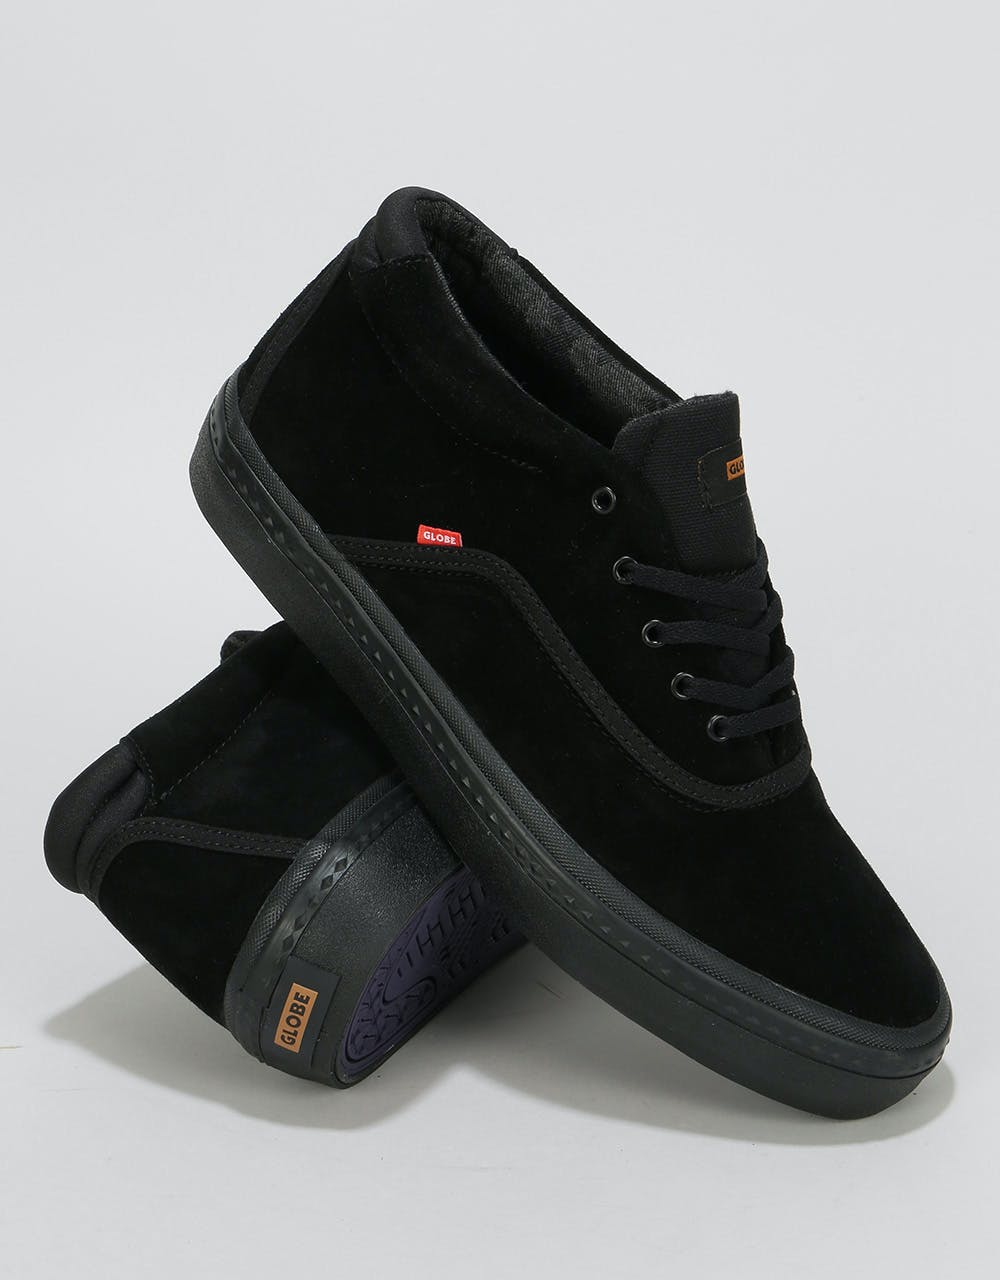 Globe Sprout Mid Skate Shoes - Black/Black